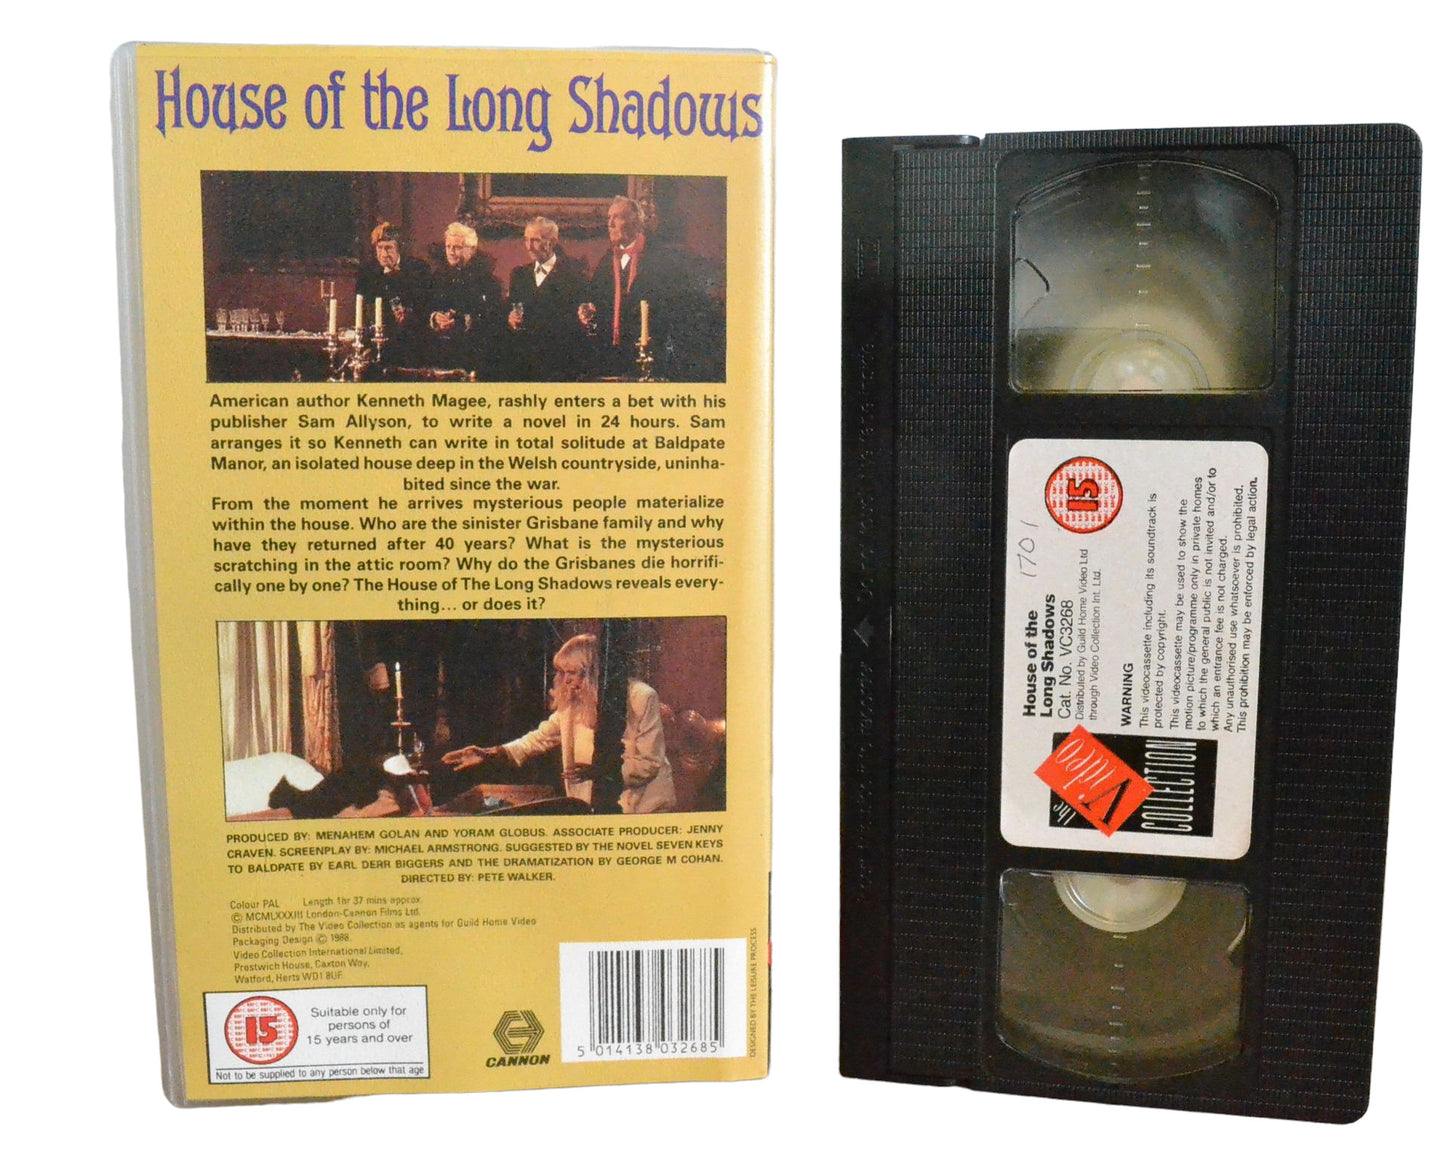 House Of The Long Shadows - Vincent Price - The Video Collection - VC3268 - Horror - Precert - Pal - VHS-